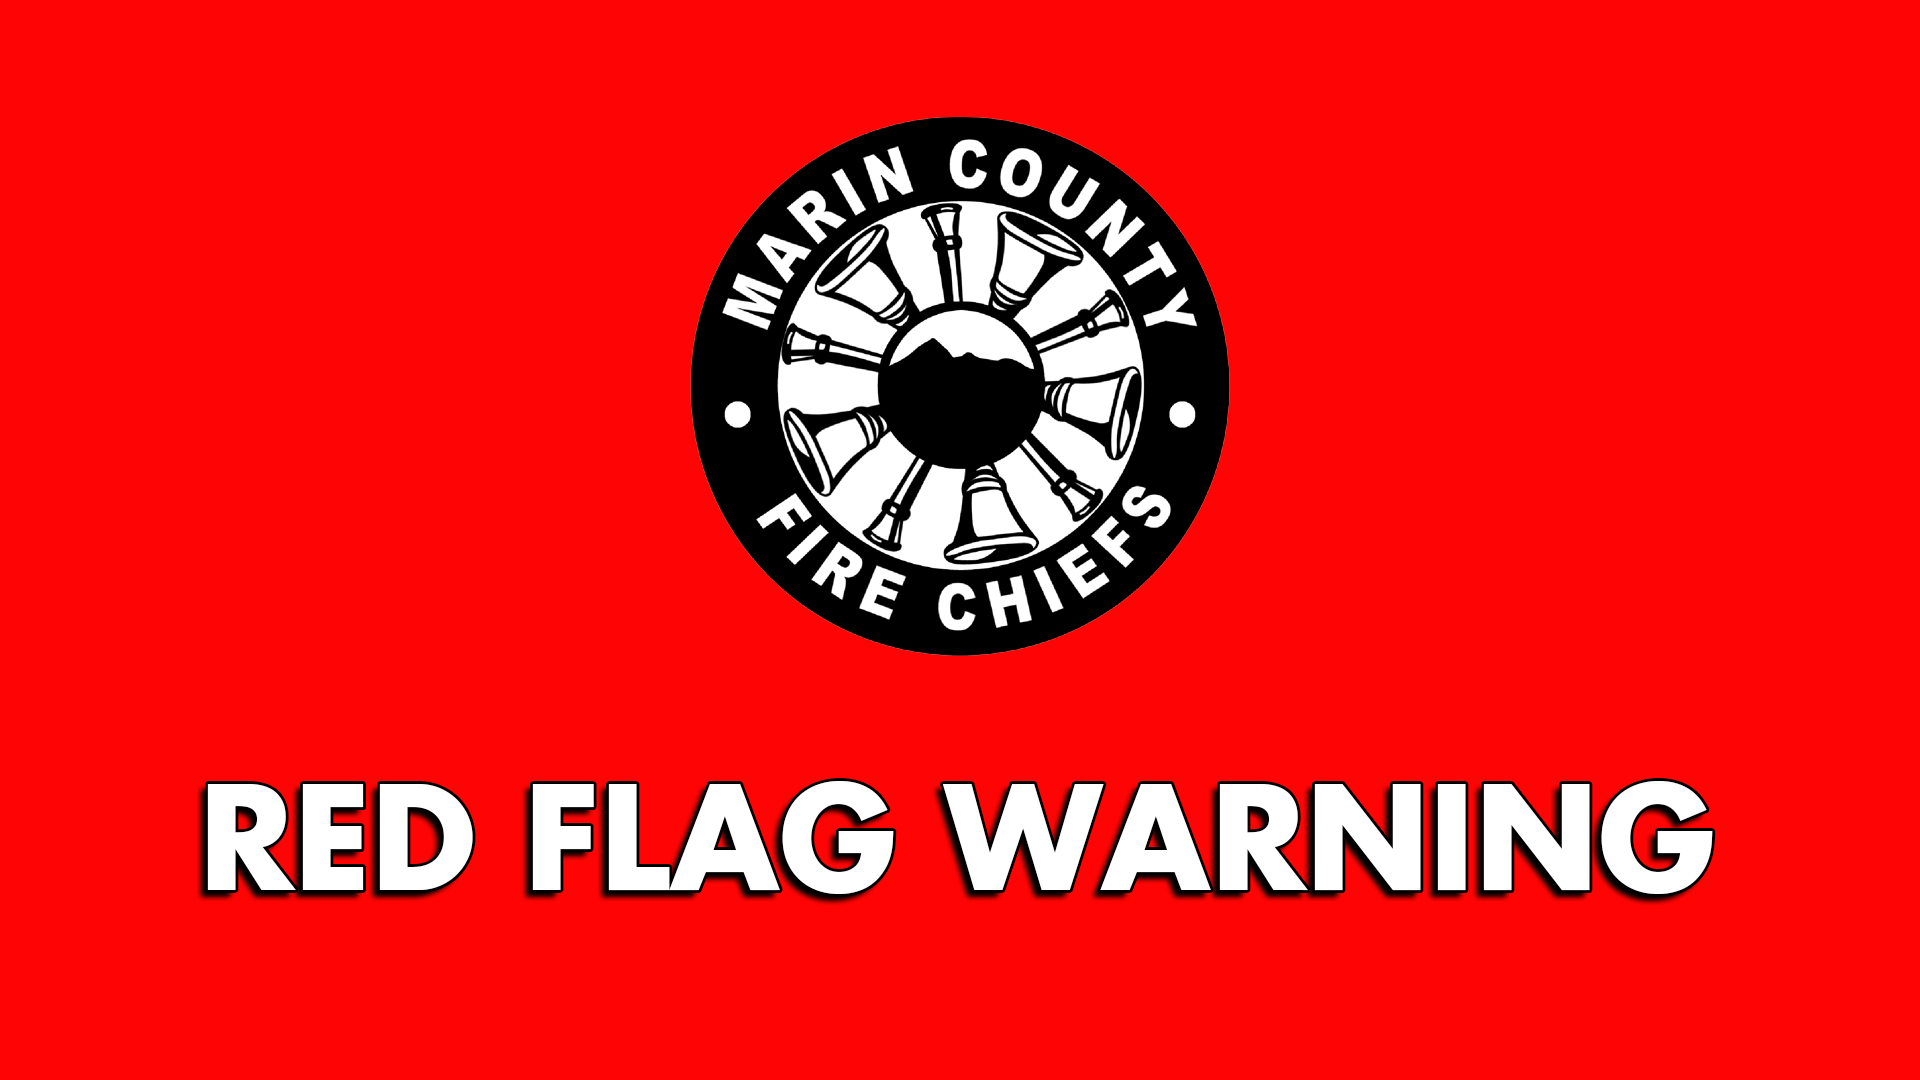 Graphic says Marin County Fire Chiefs Red Flag Warning